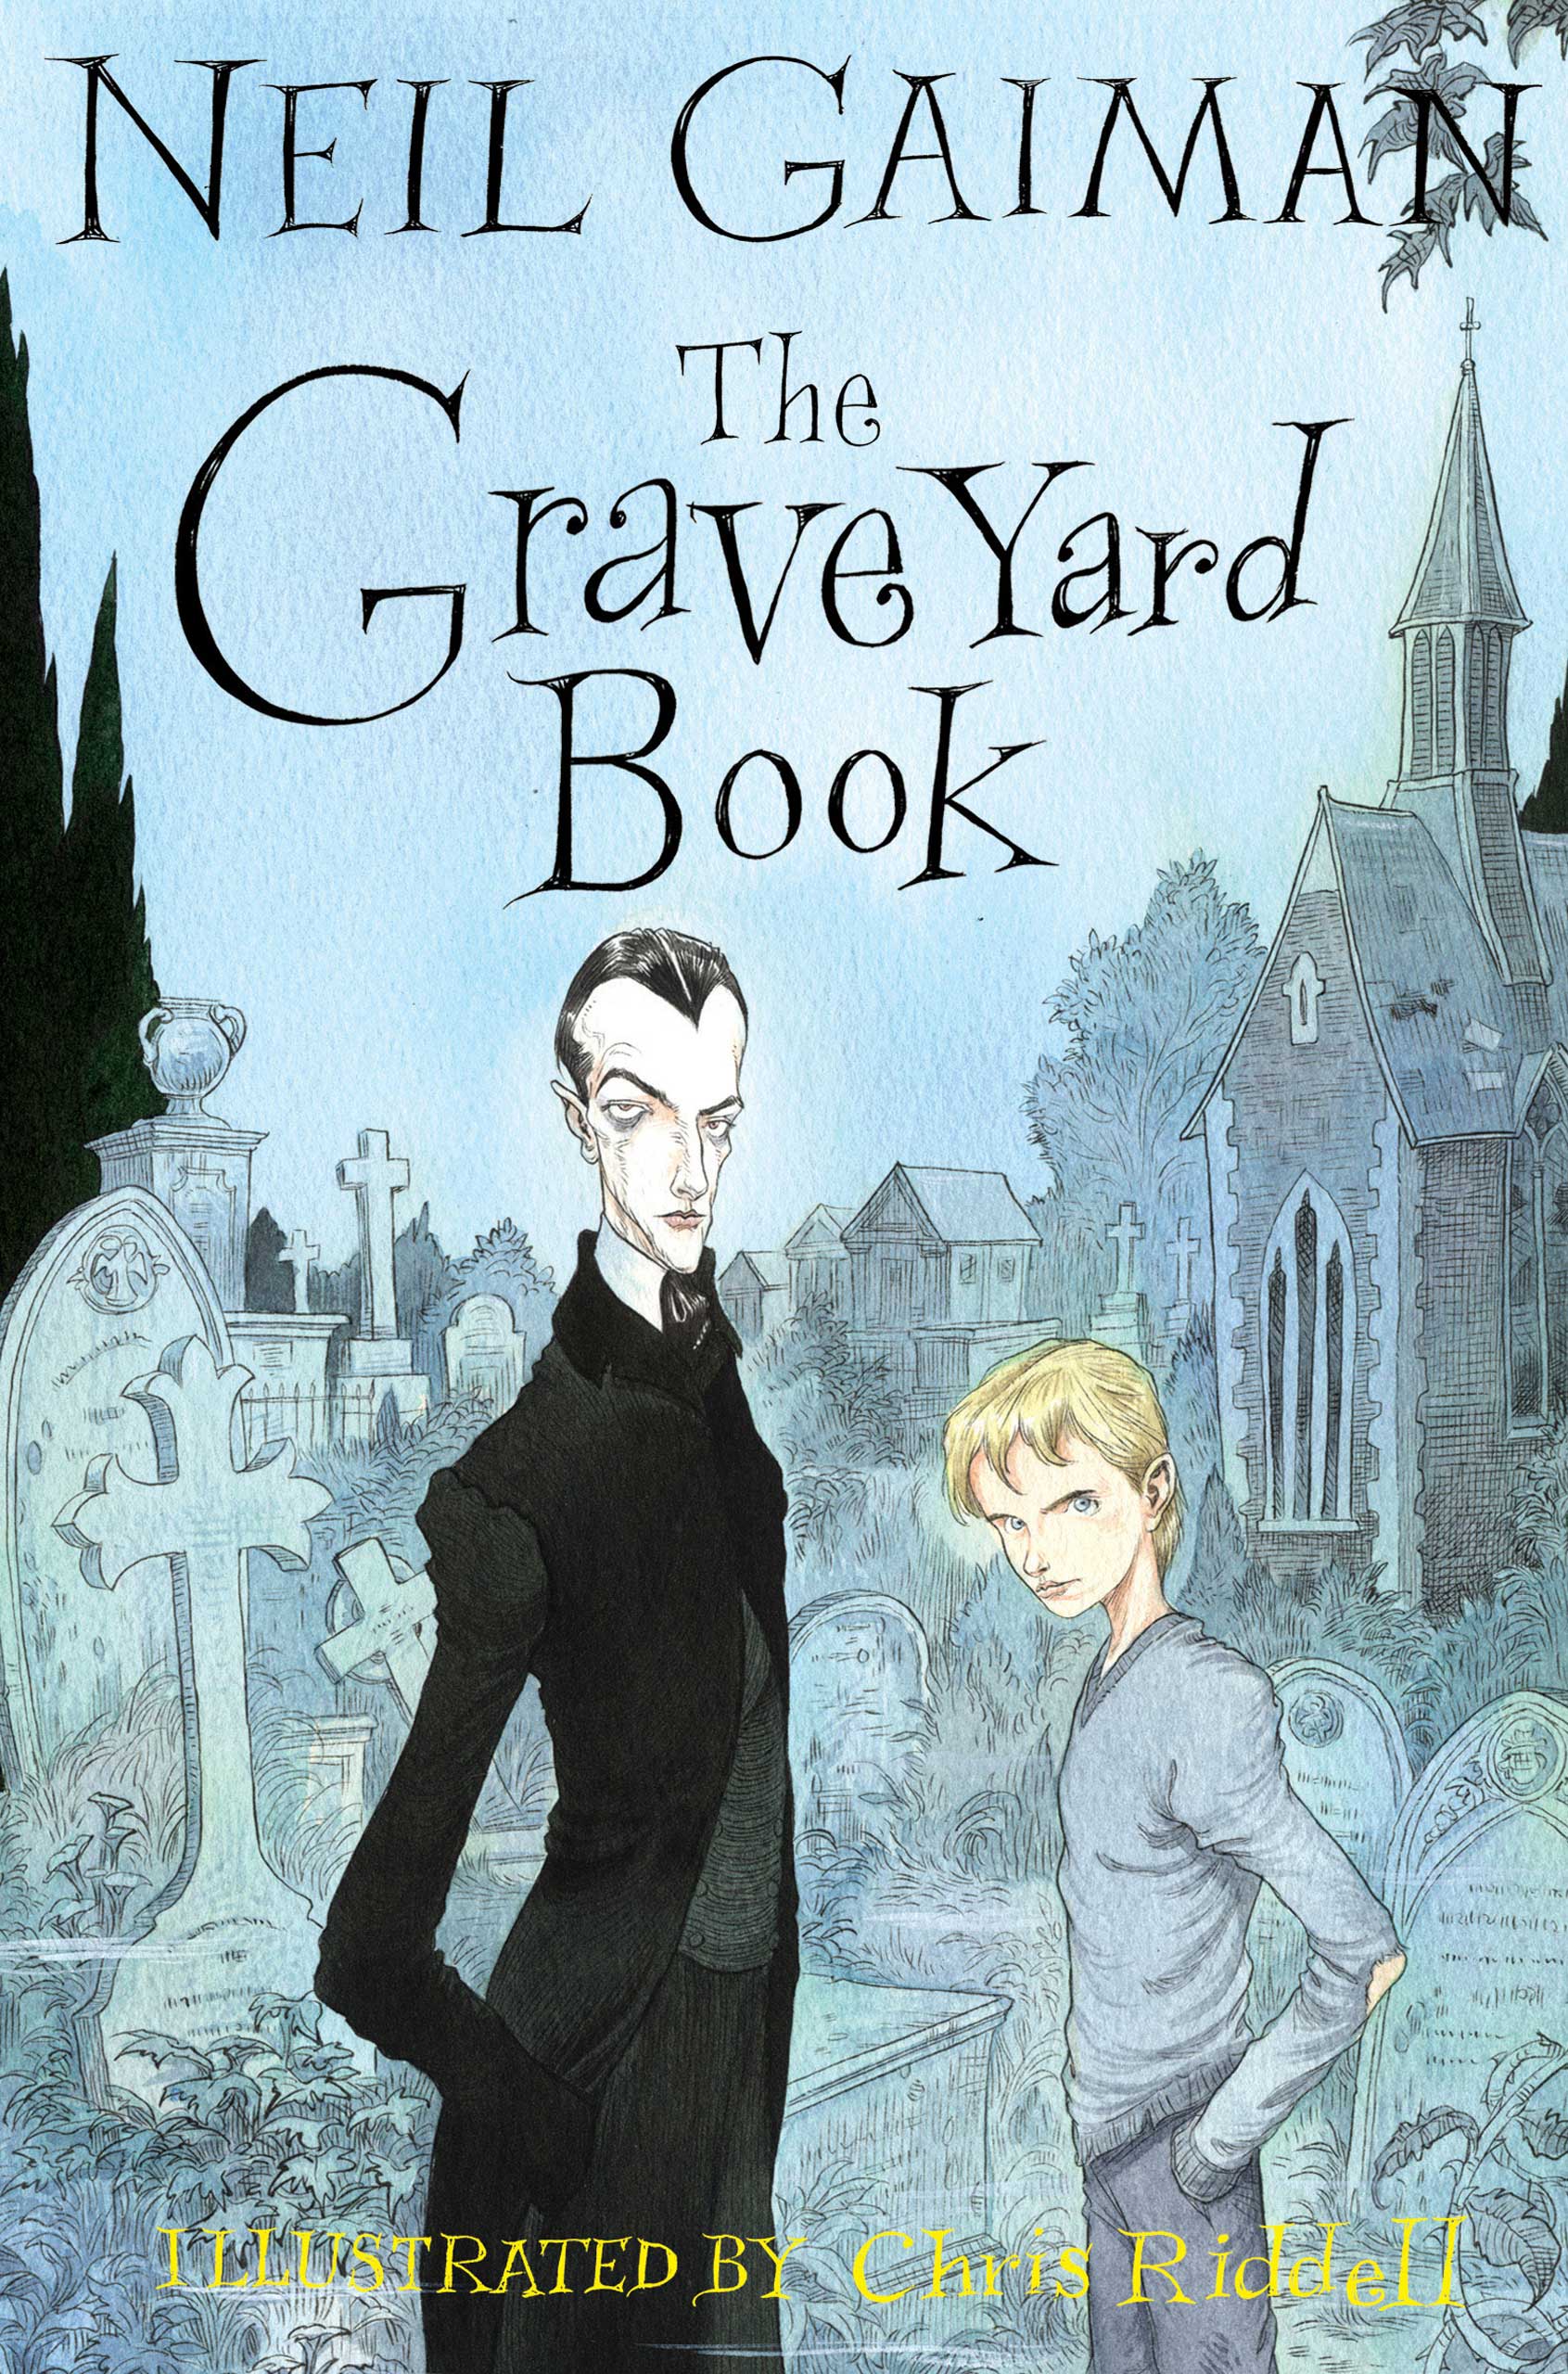 The Graveyard Book, by Neil Gaiman.
                              
                              
                              
                              Bod, who was adopted by ghosts and has become a part of the community of supernatural beings living in a graveyard, faces adventures and obstacles in the graveyard and natural world alike.
                              
                              
                              
                              Buy now: The Graveyard Book